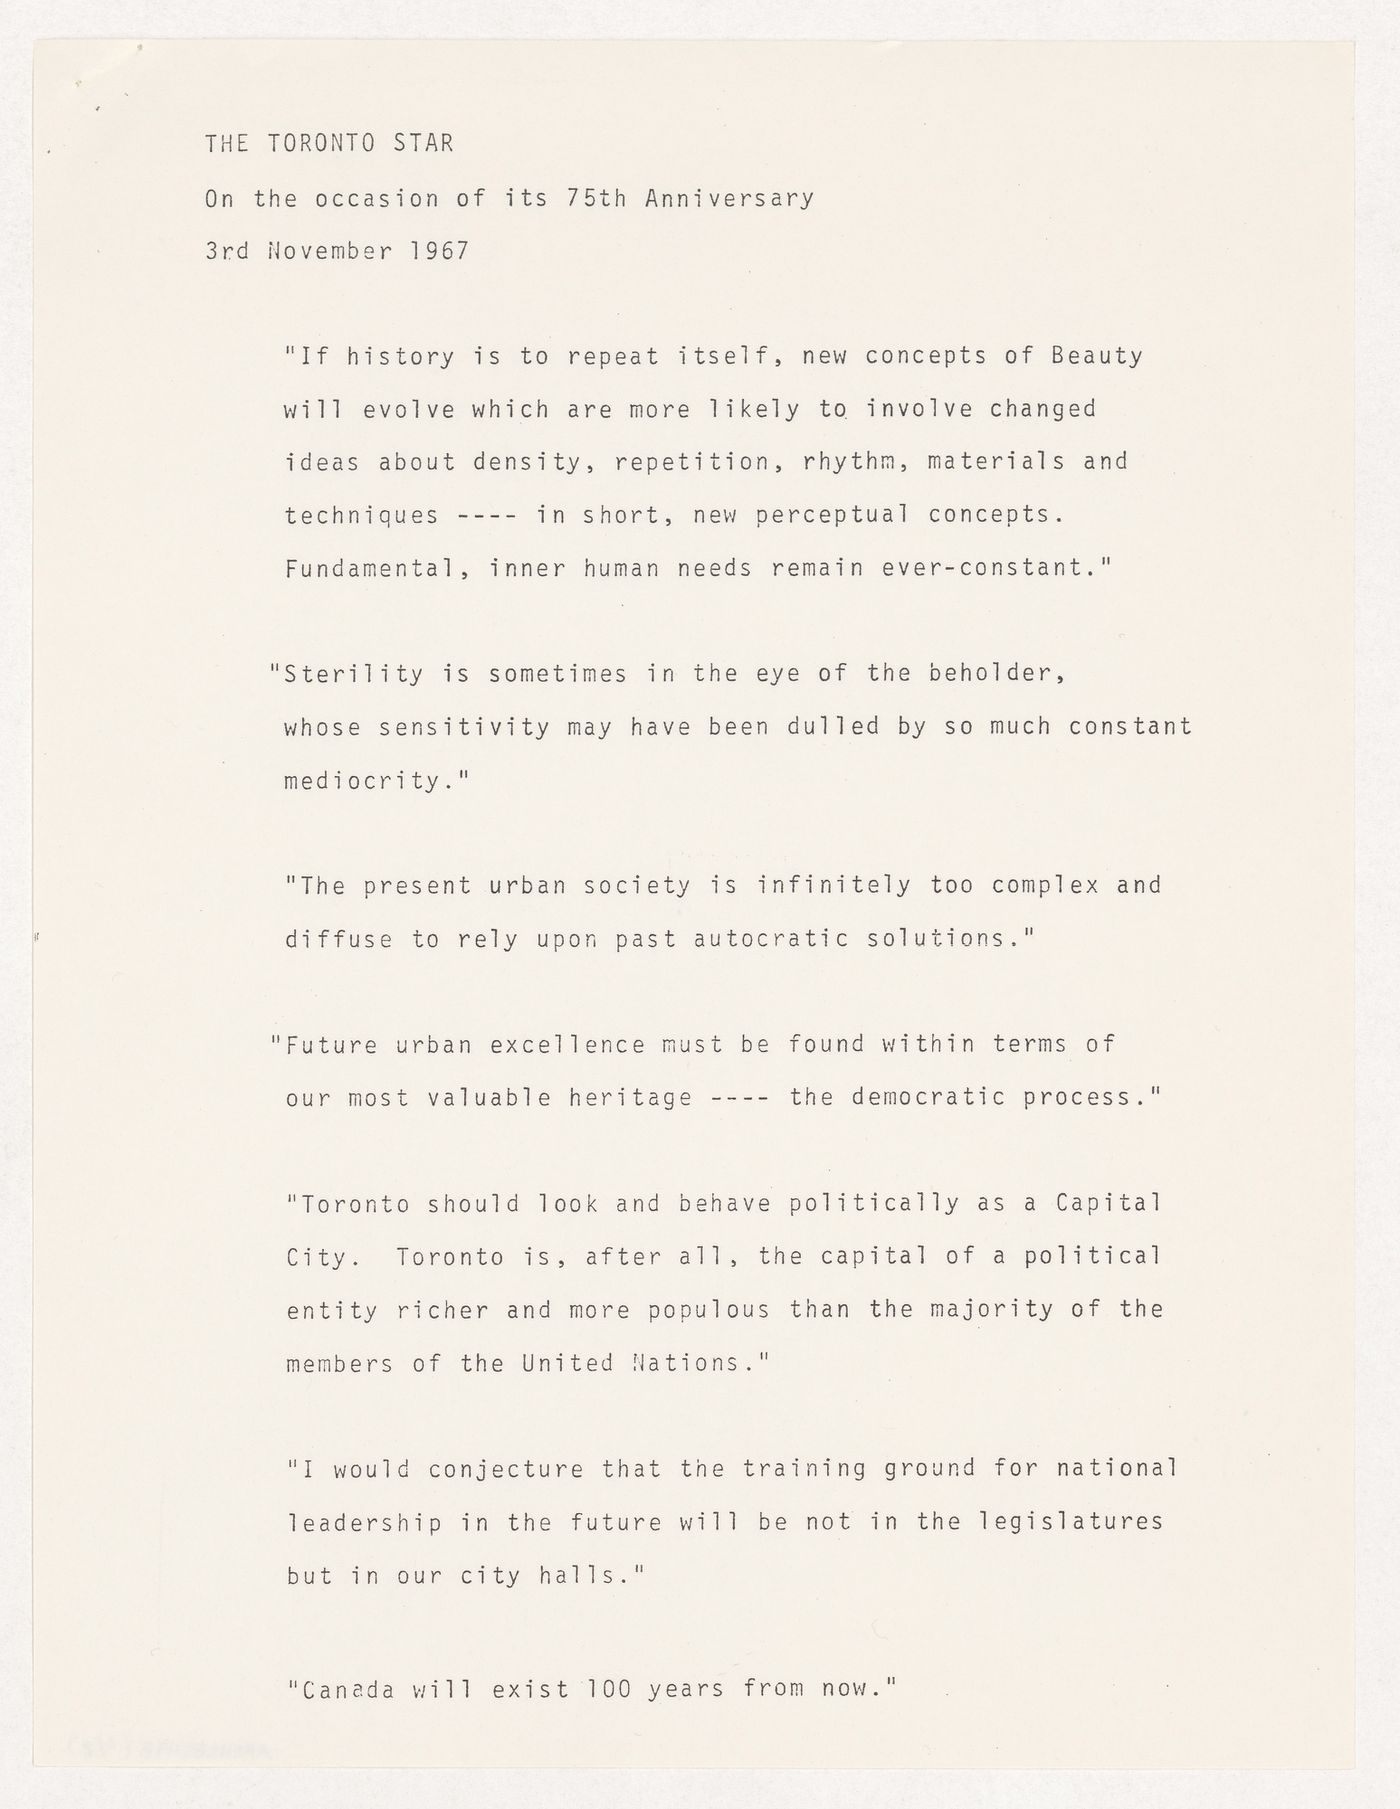 Quotations from Parkin speech given on the occasion of the Toronto Star's 75th anniversary